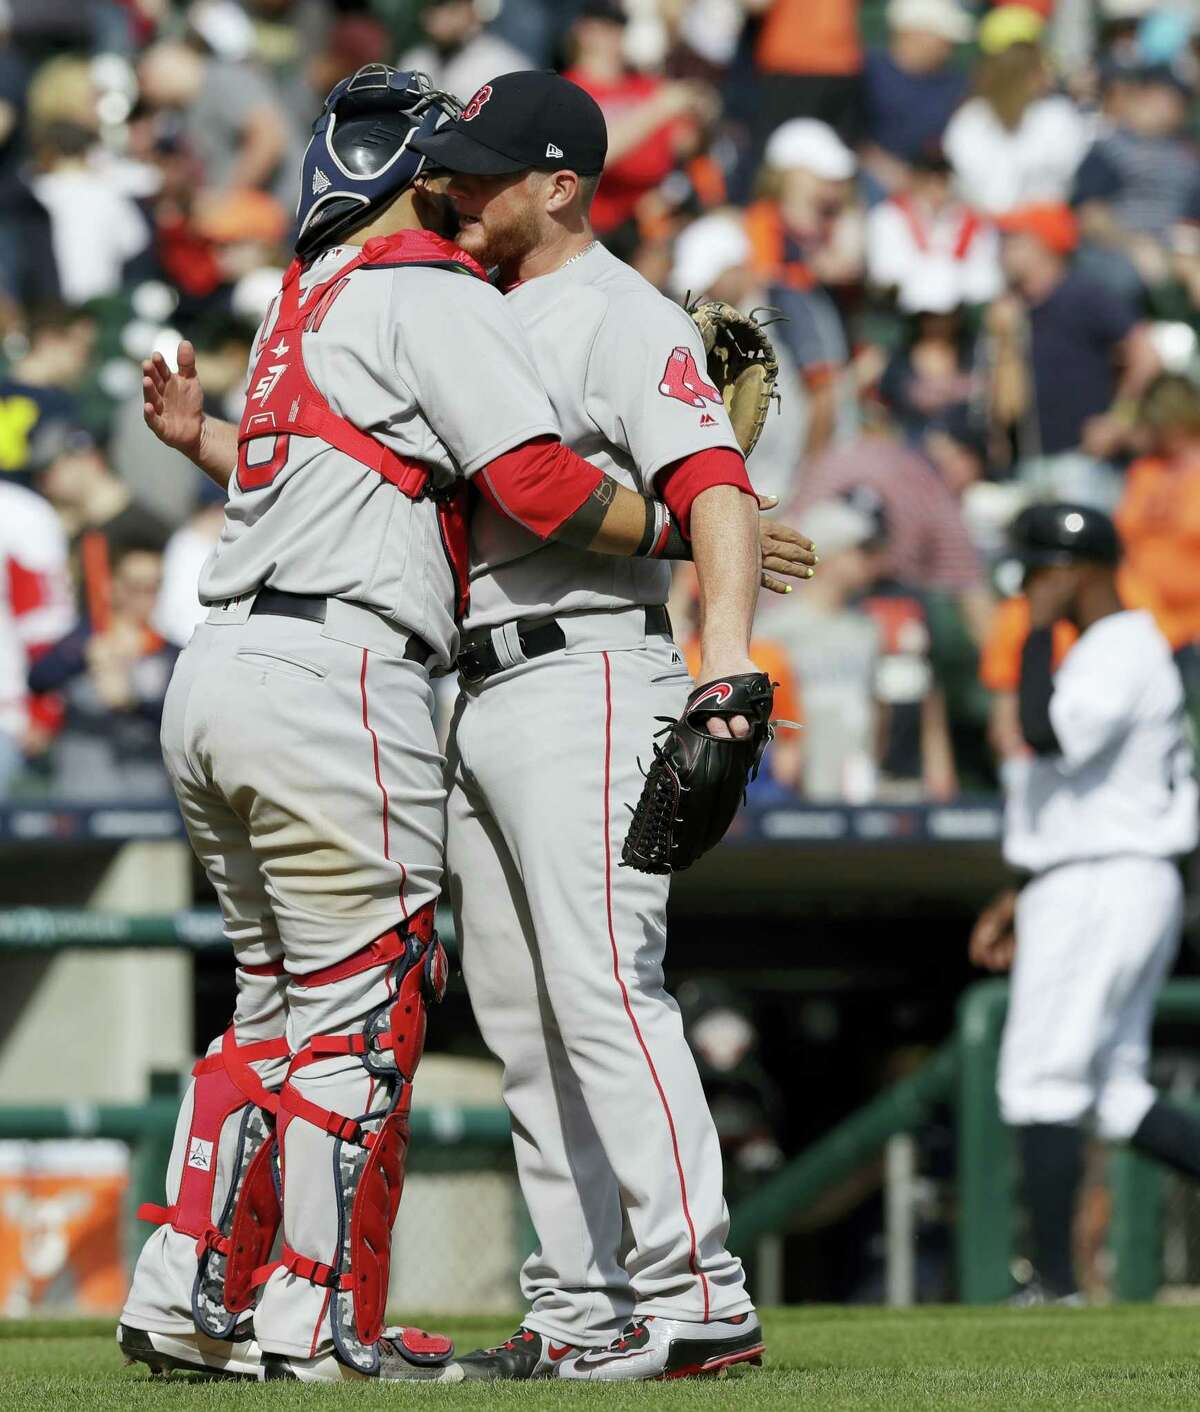 Boston Red Sox relief pitcher Craig Kimbrel is hugged by catcher Sandy Leon after the team’s 7-5 win over the Detroit Tigers in a baseball game on April 9, 2017 in Detroit.